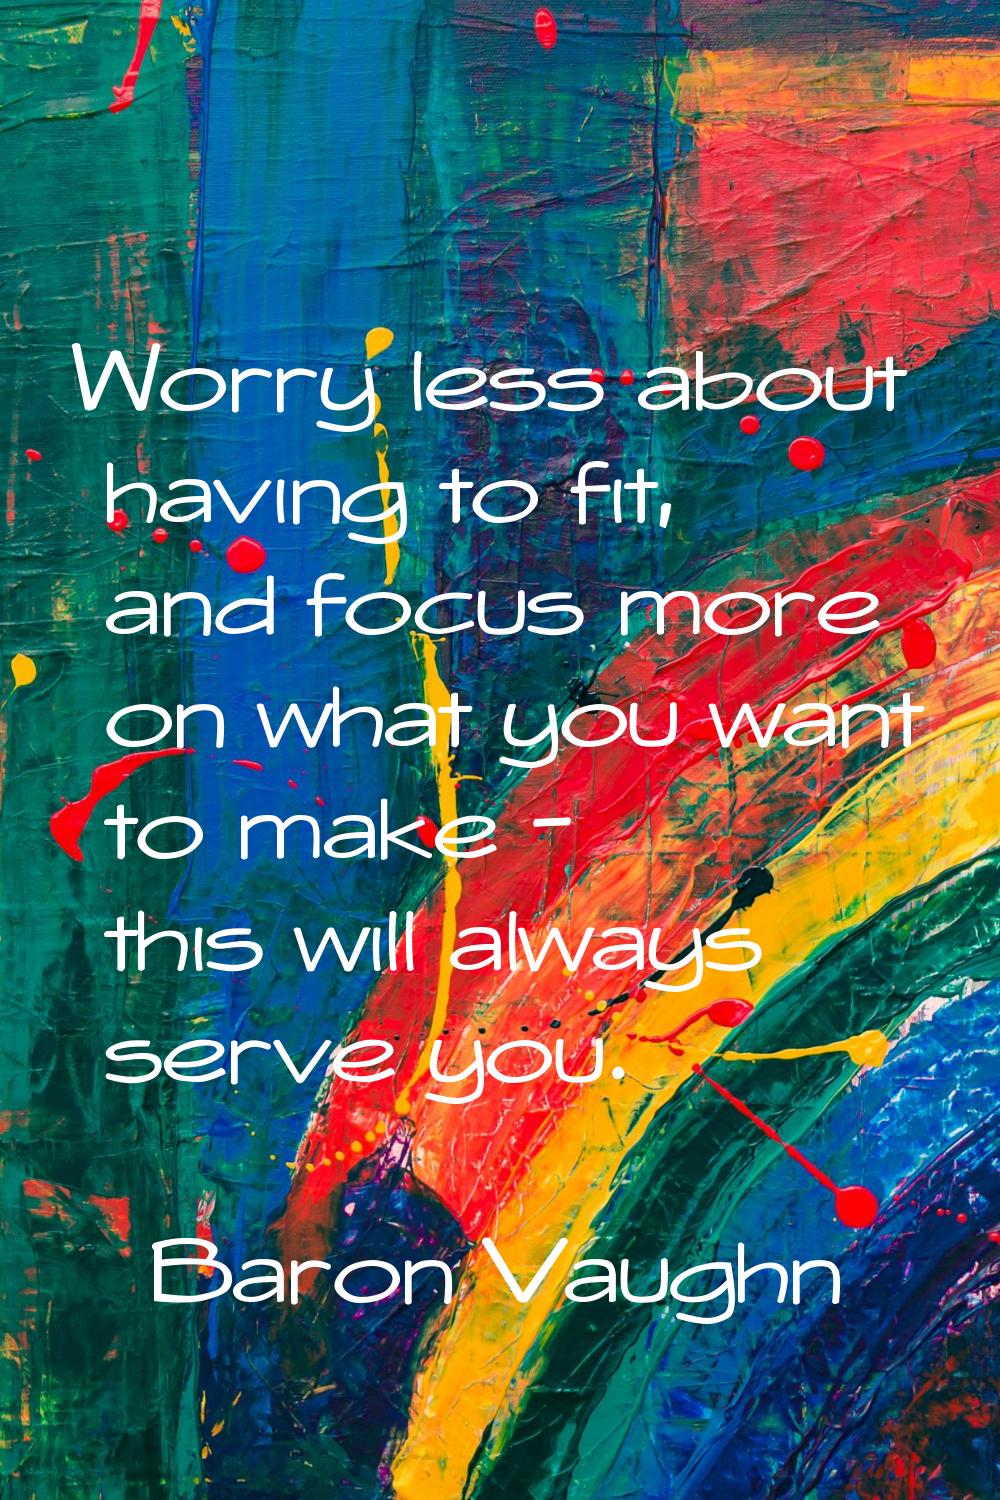 Worry less about having to fit, and focus more on what you want to make - this will always serve yo